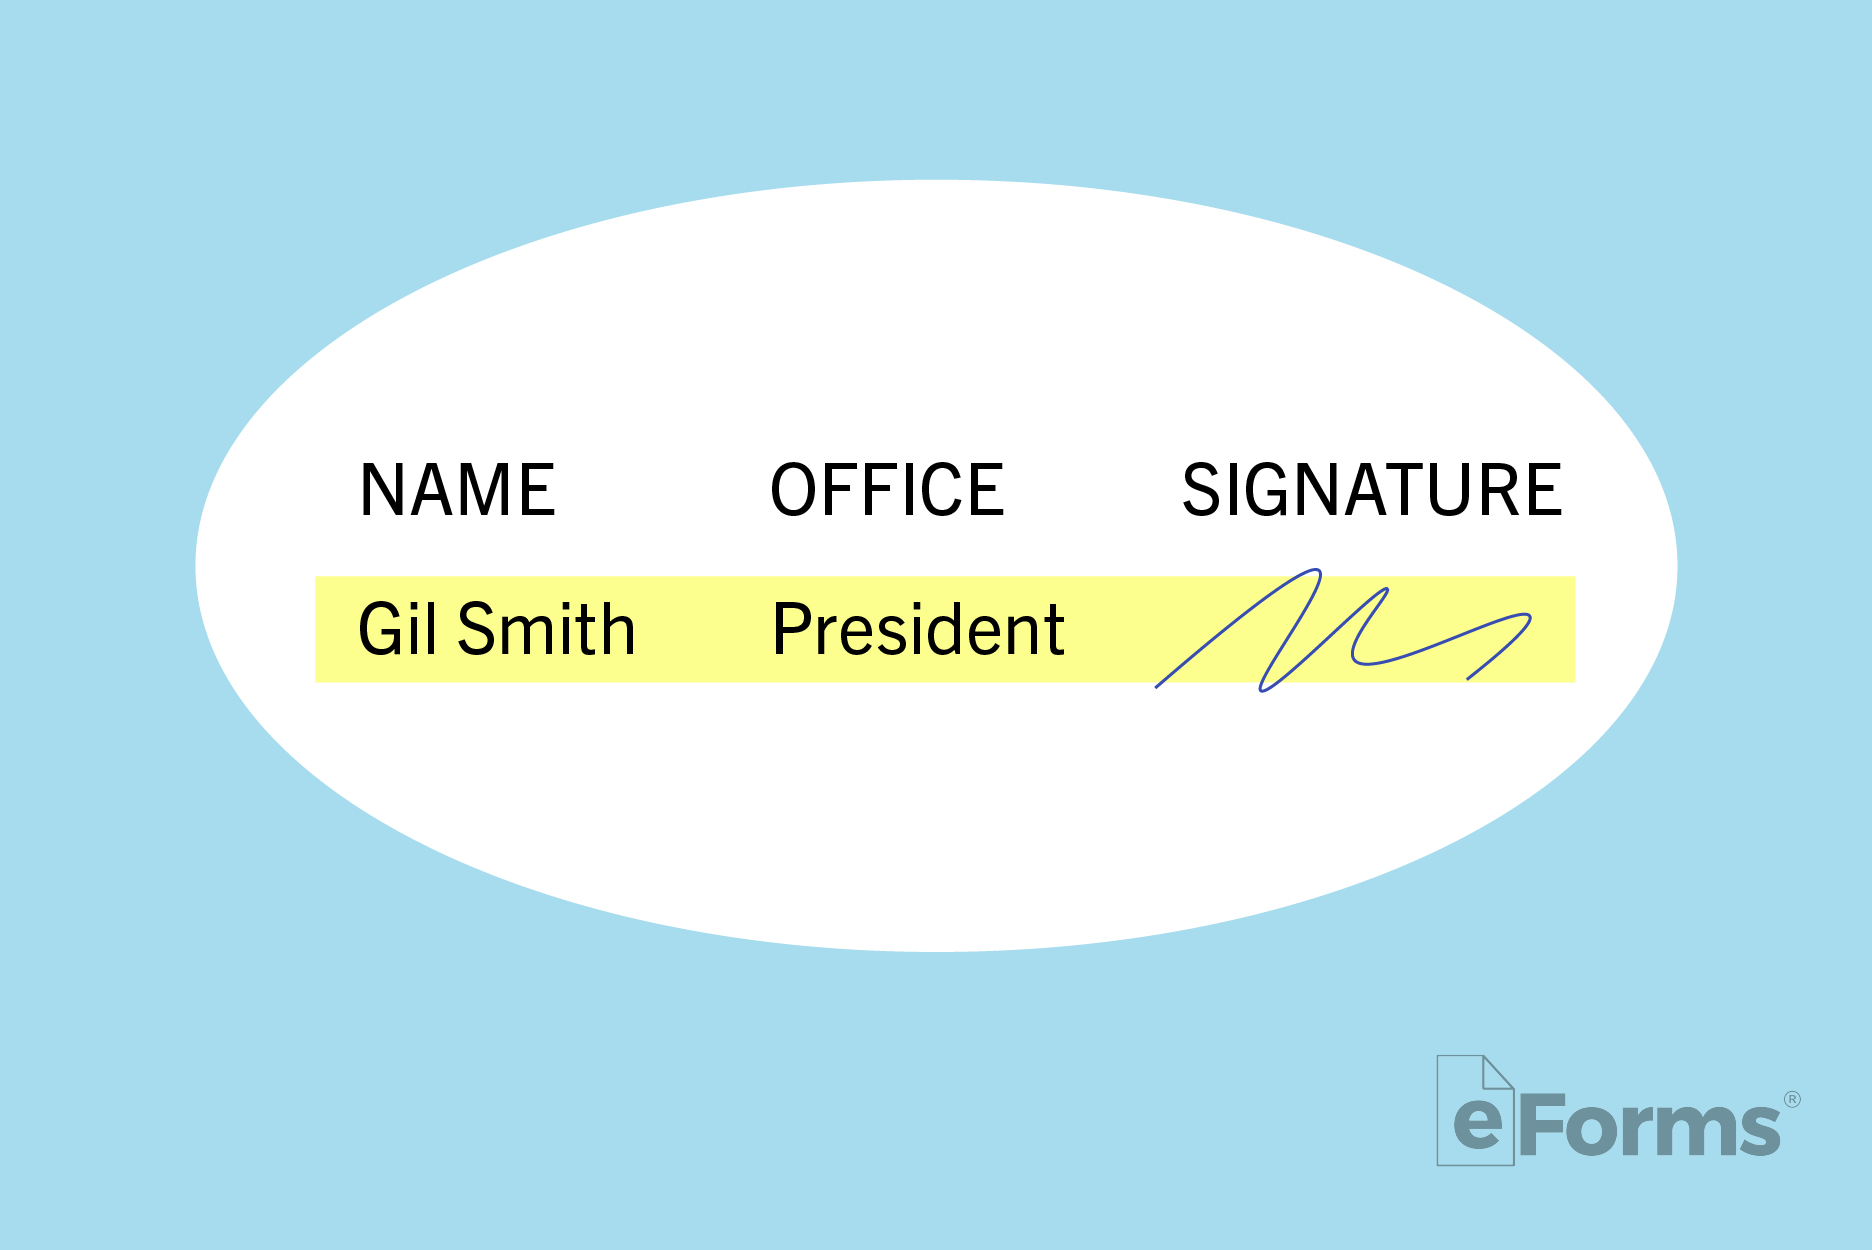 Diagram showing how to fill out frames, titles, and signatures.